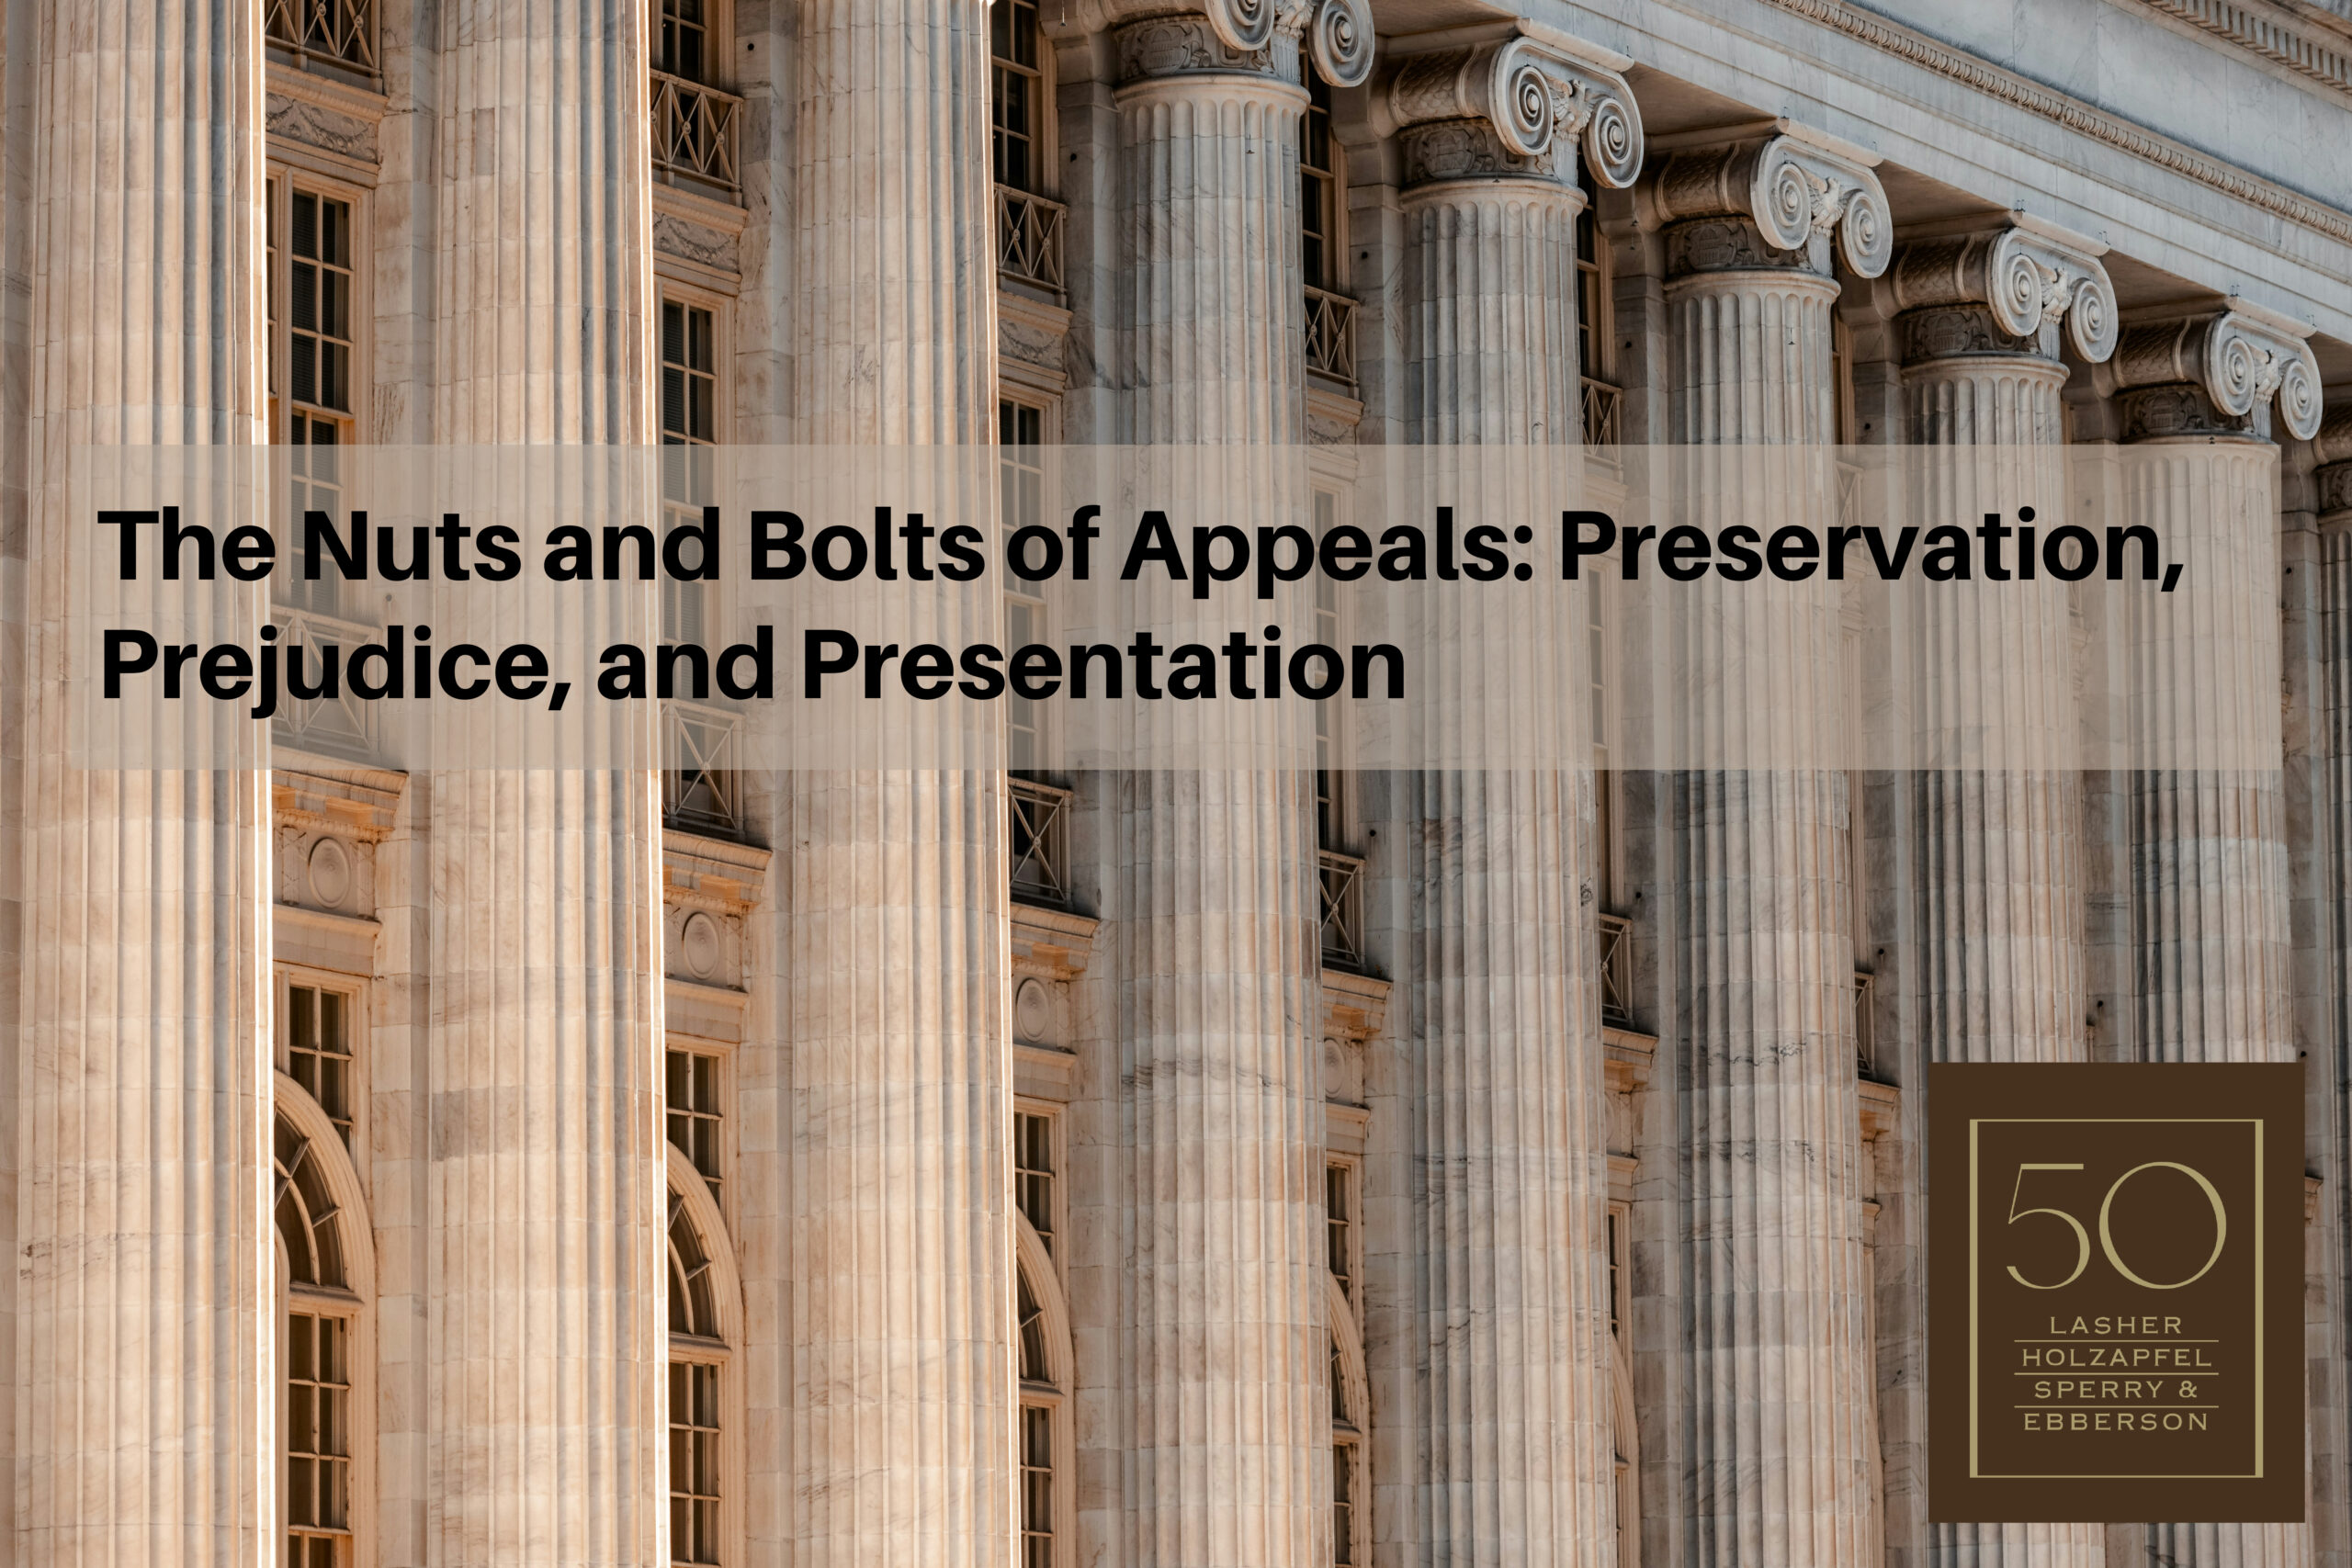 The Nuts and Bolts of Appeals: Preservation, Prejudice, and Presentation